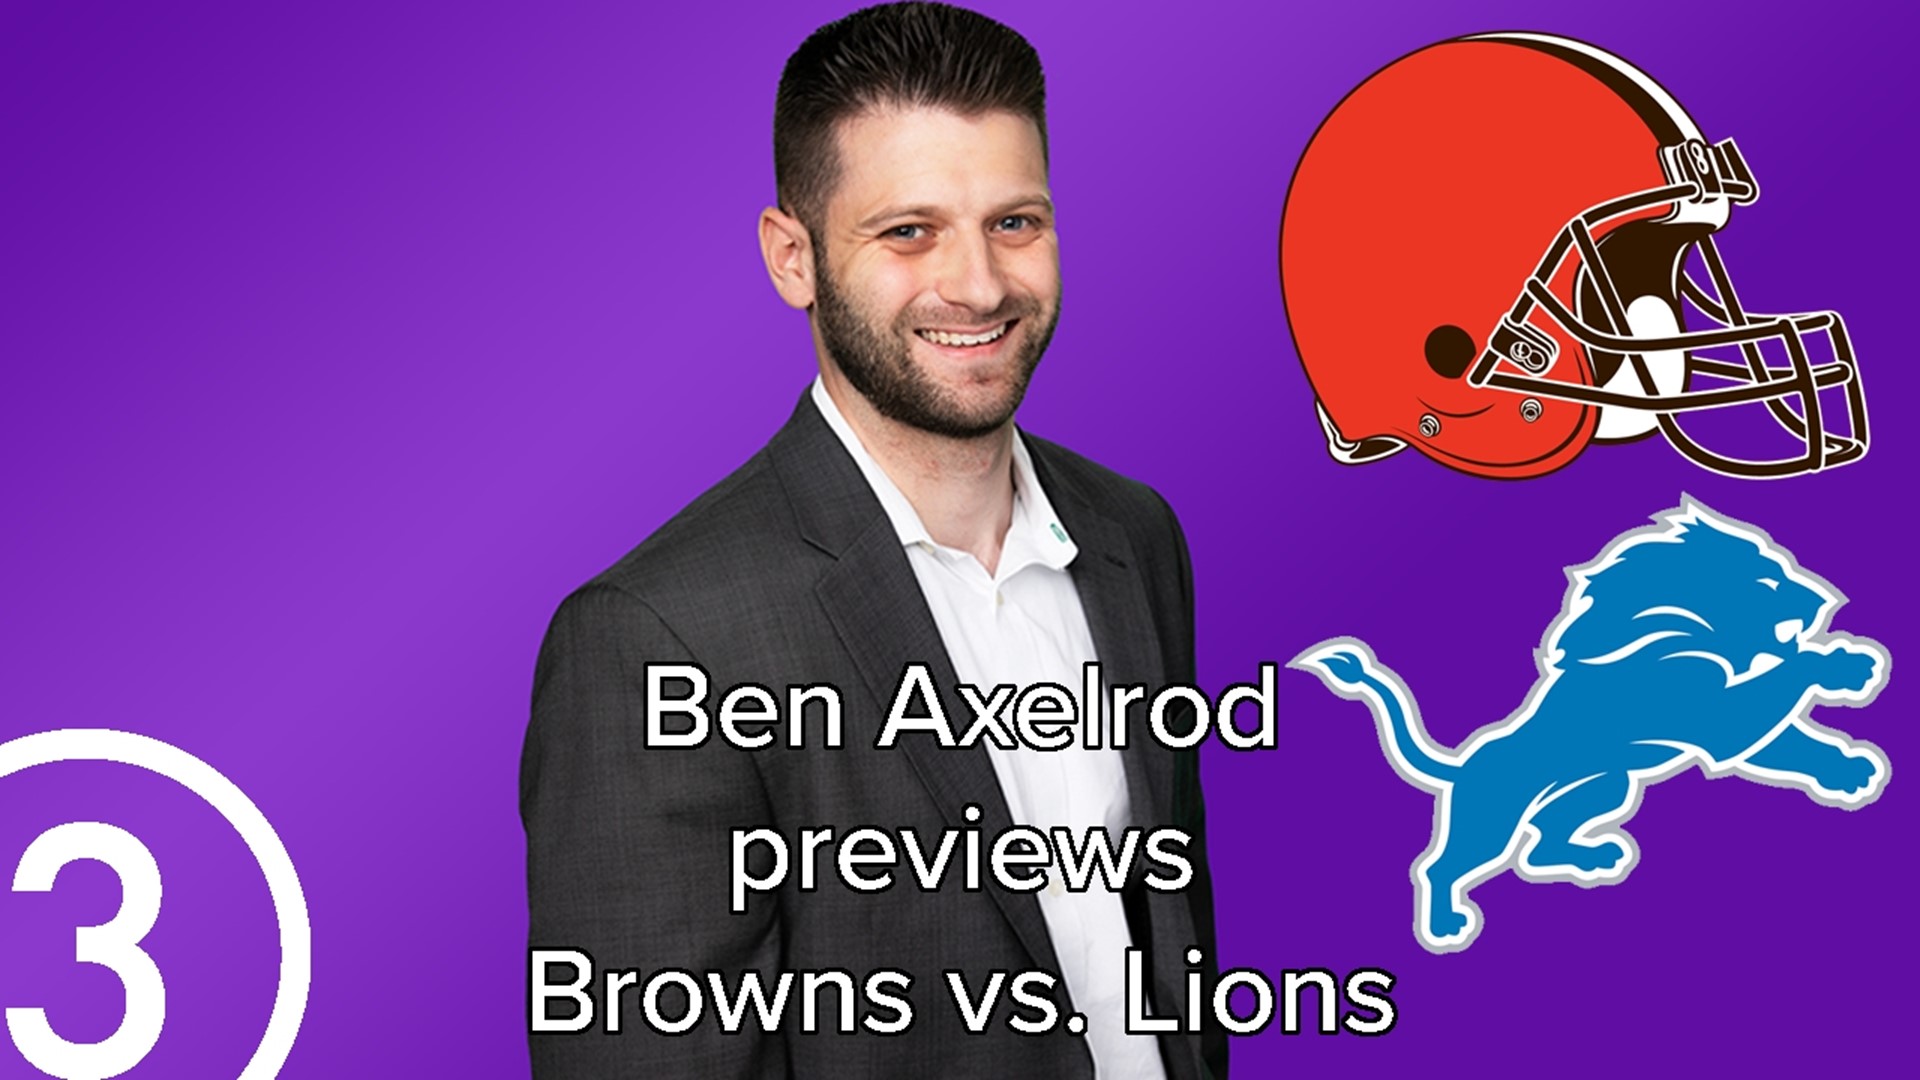 Ben Axelrod previews the Cleveland Browns' Week 11 matchup vs. the Detroit Lions